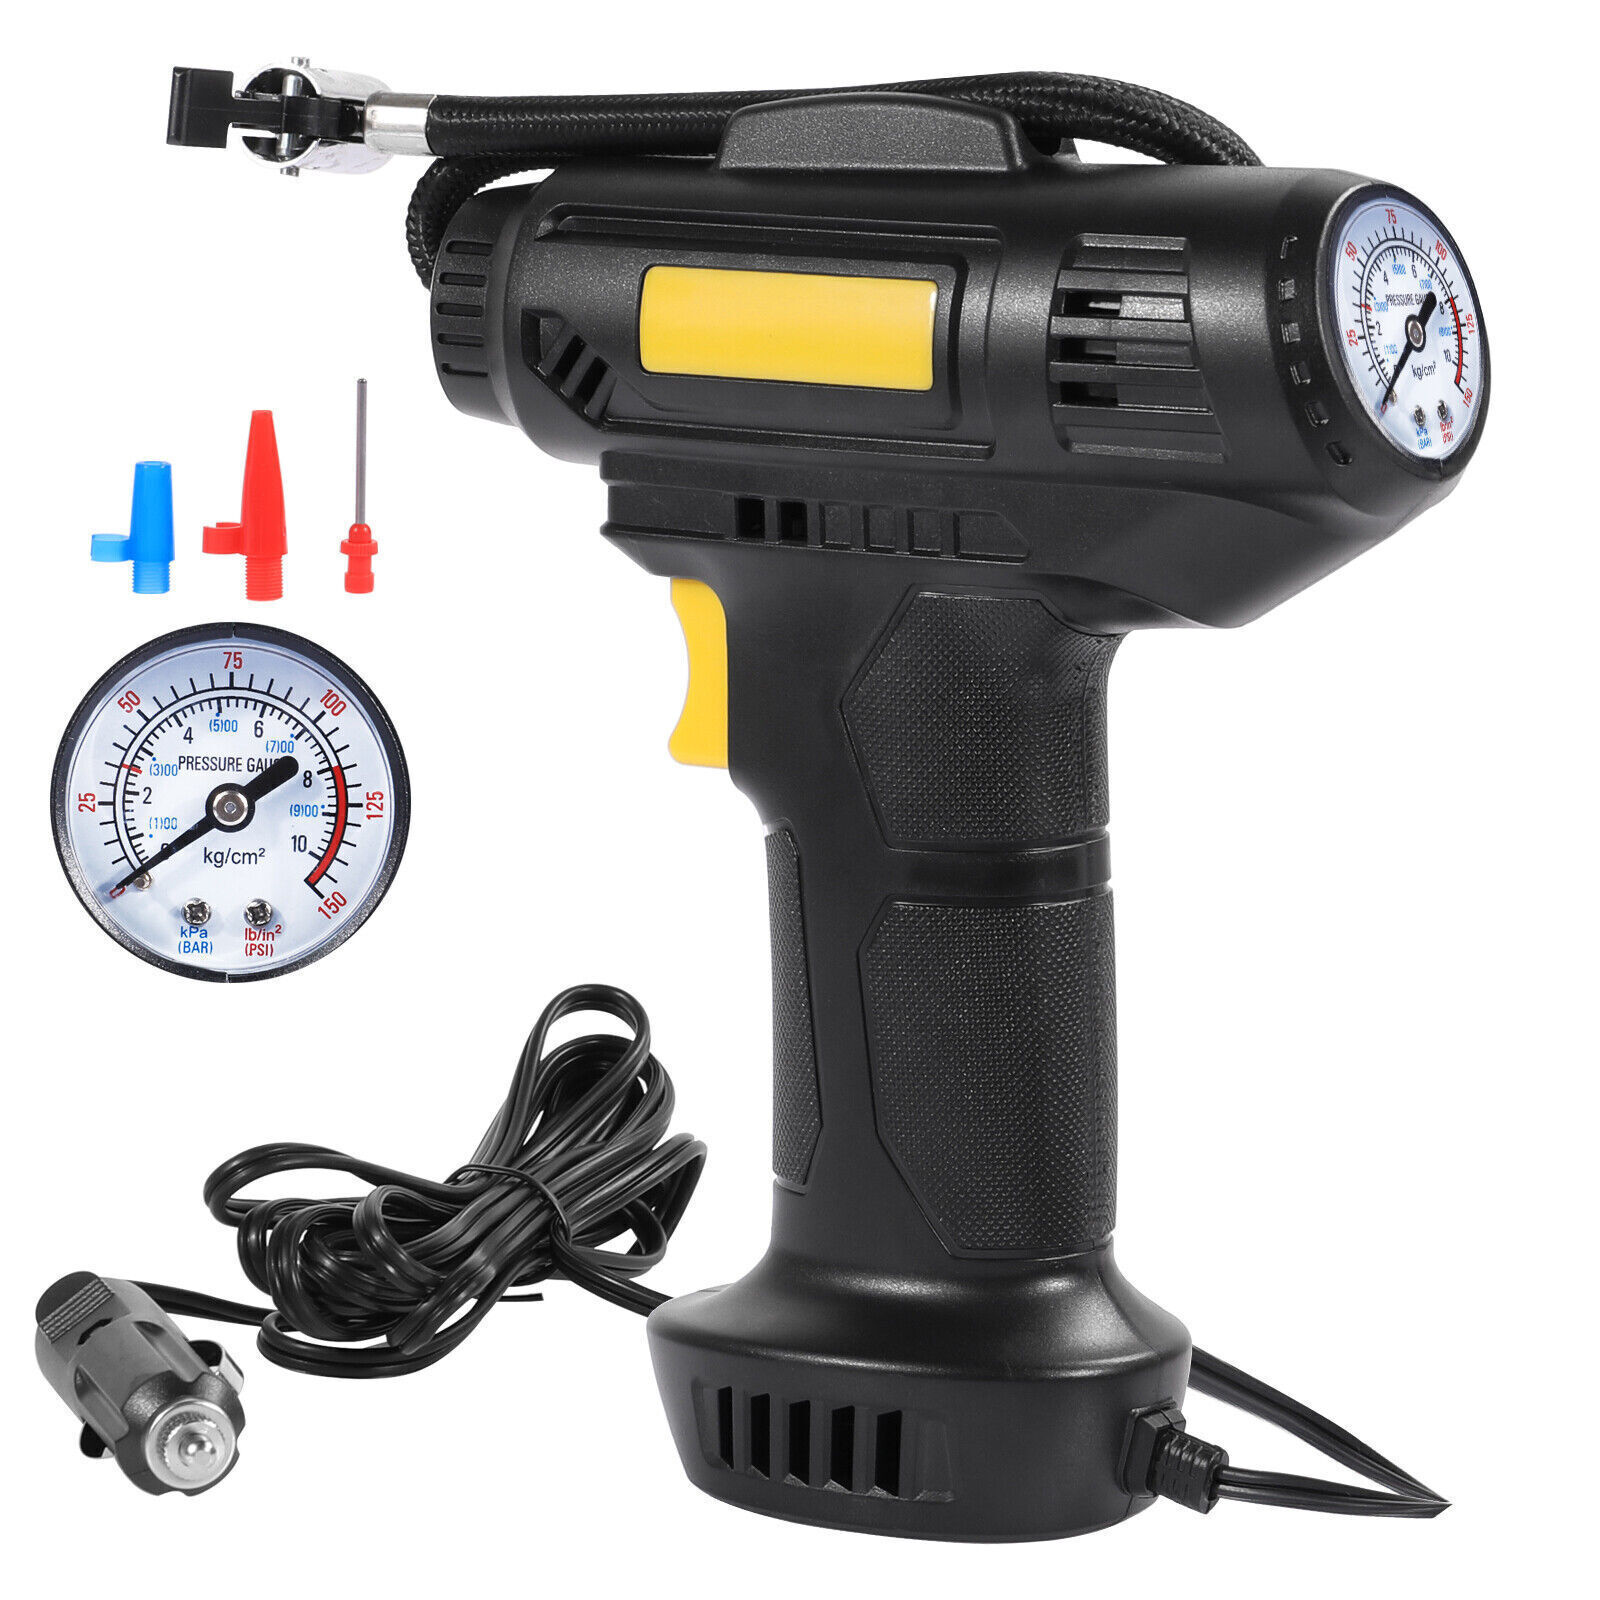 120W Portable Air Compressor: Inflate Your Tires With Ease - Wireless Tool